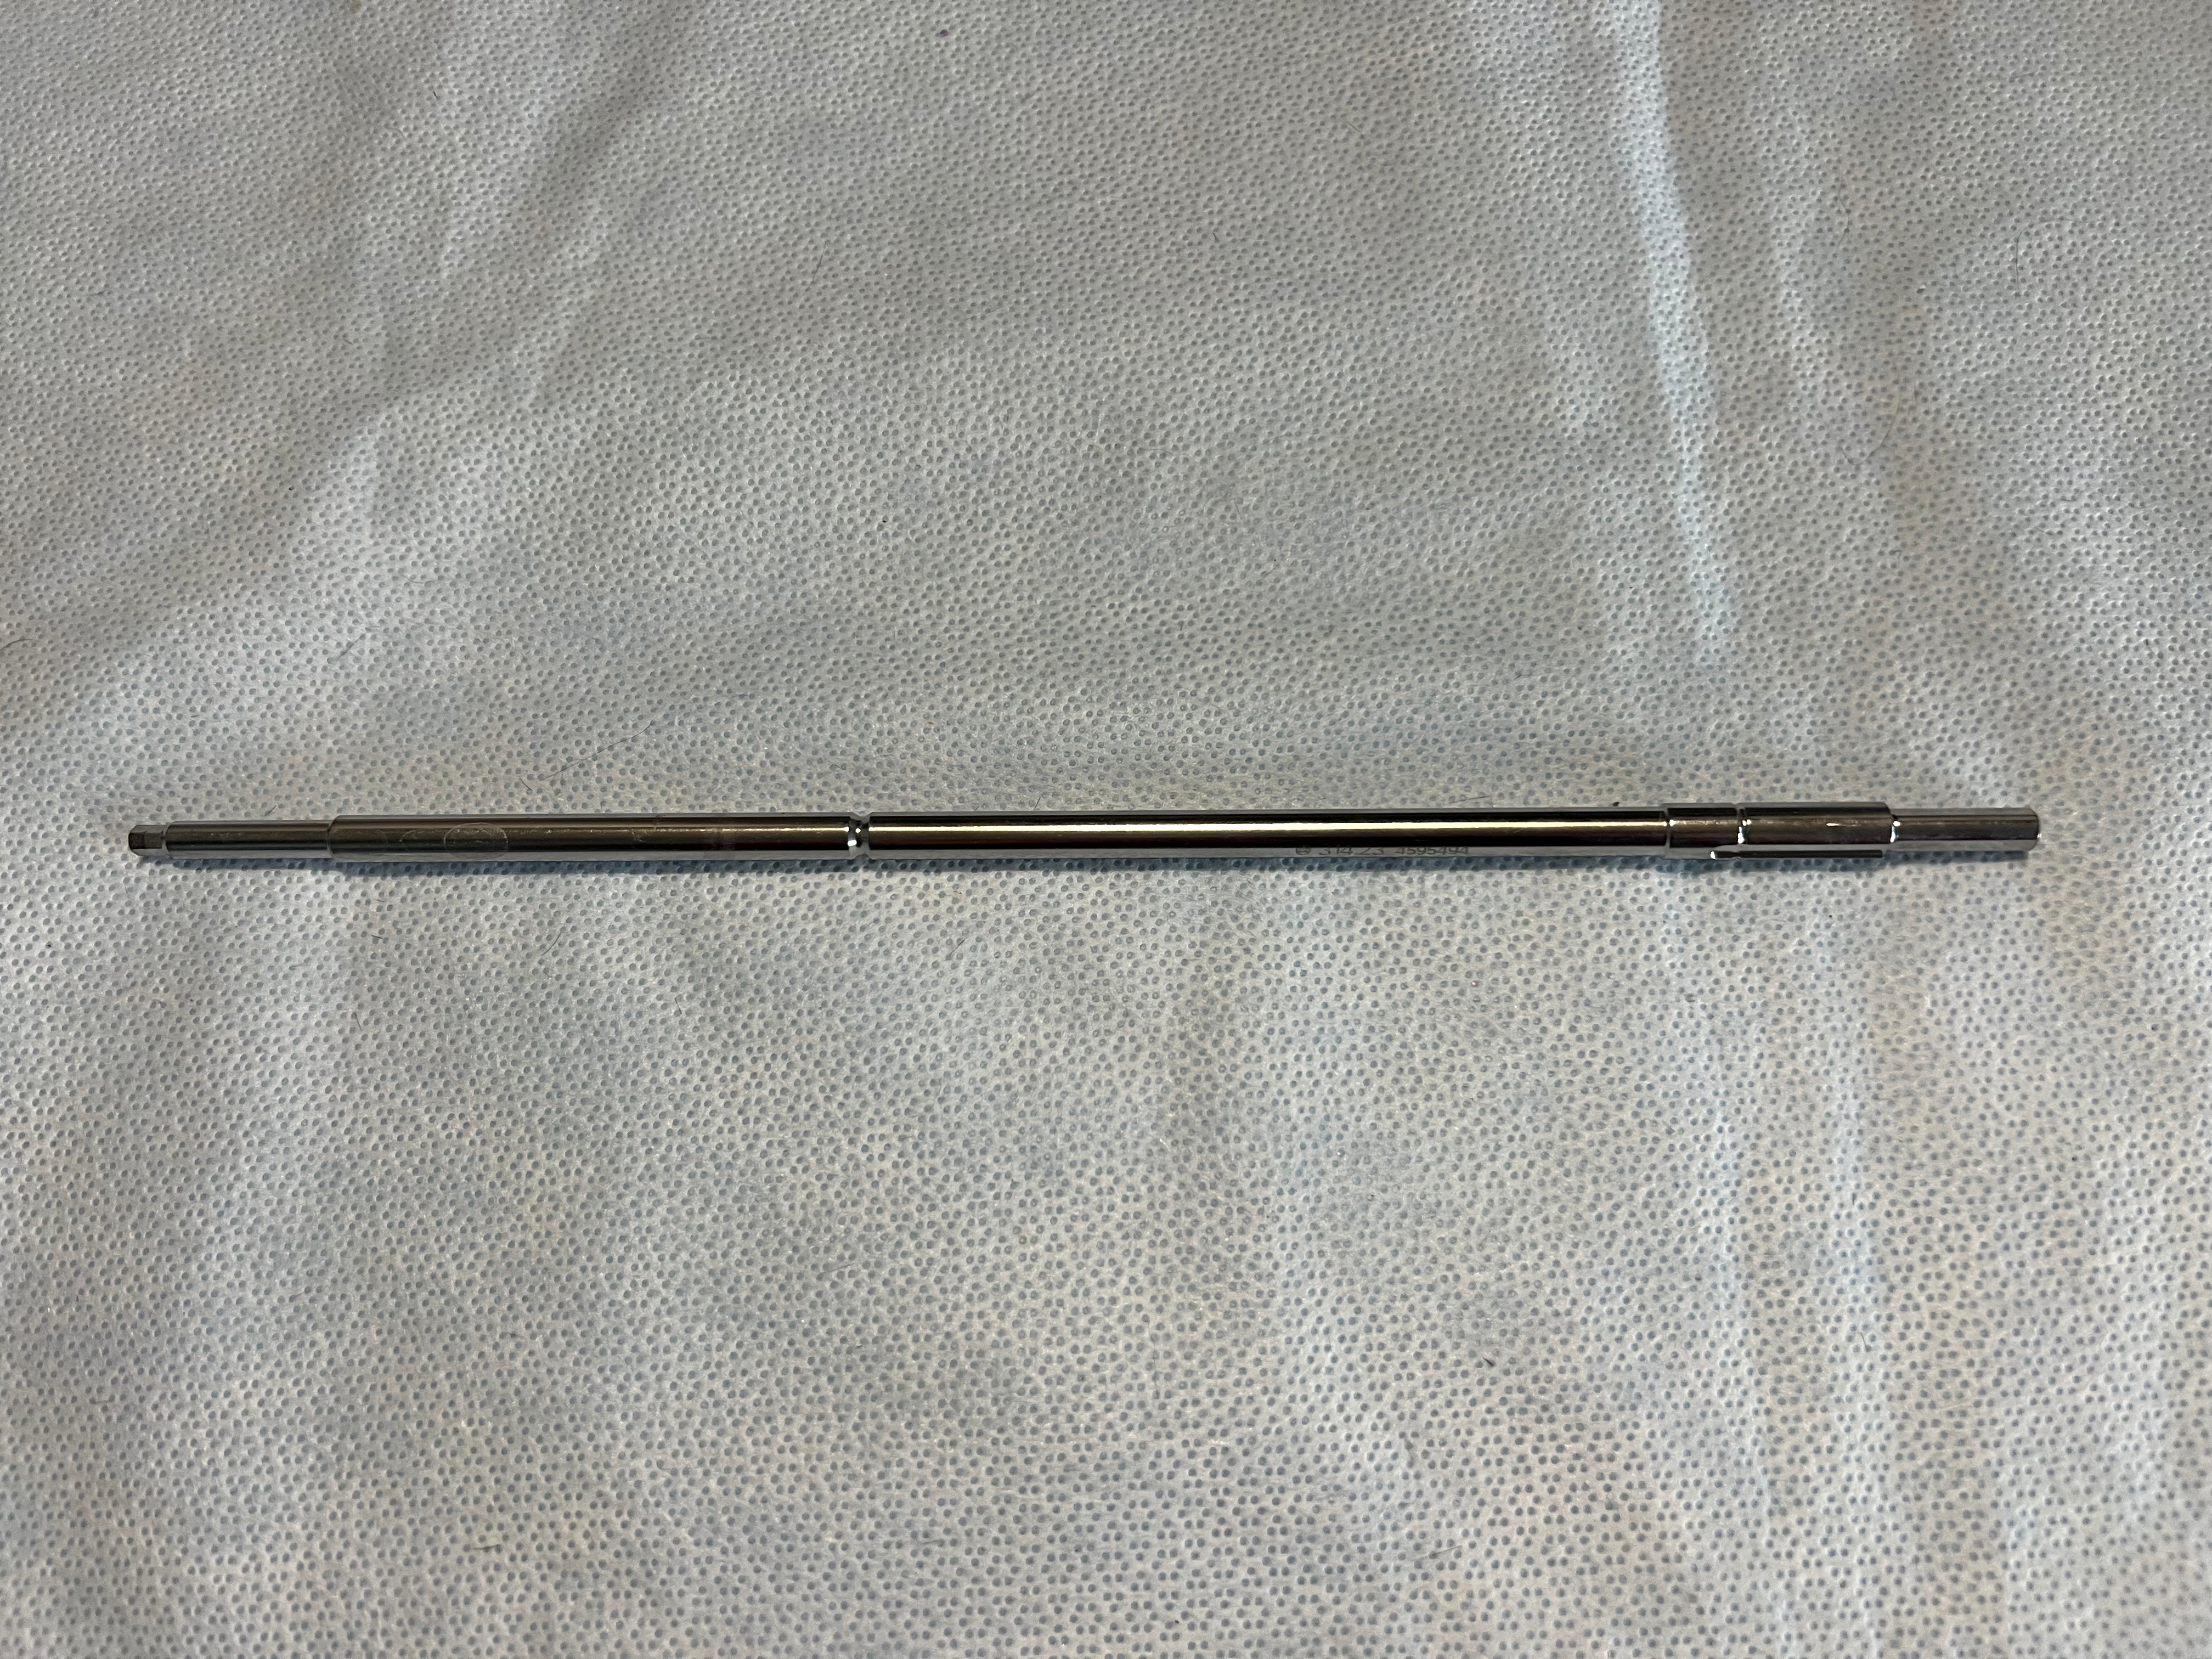 314.23 Cannulated Hexagonal Driver Shaft 270mm US1232